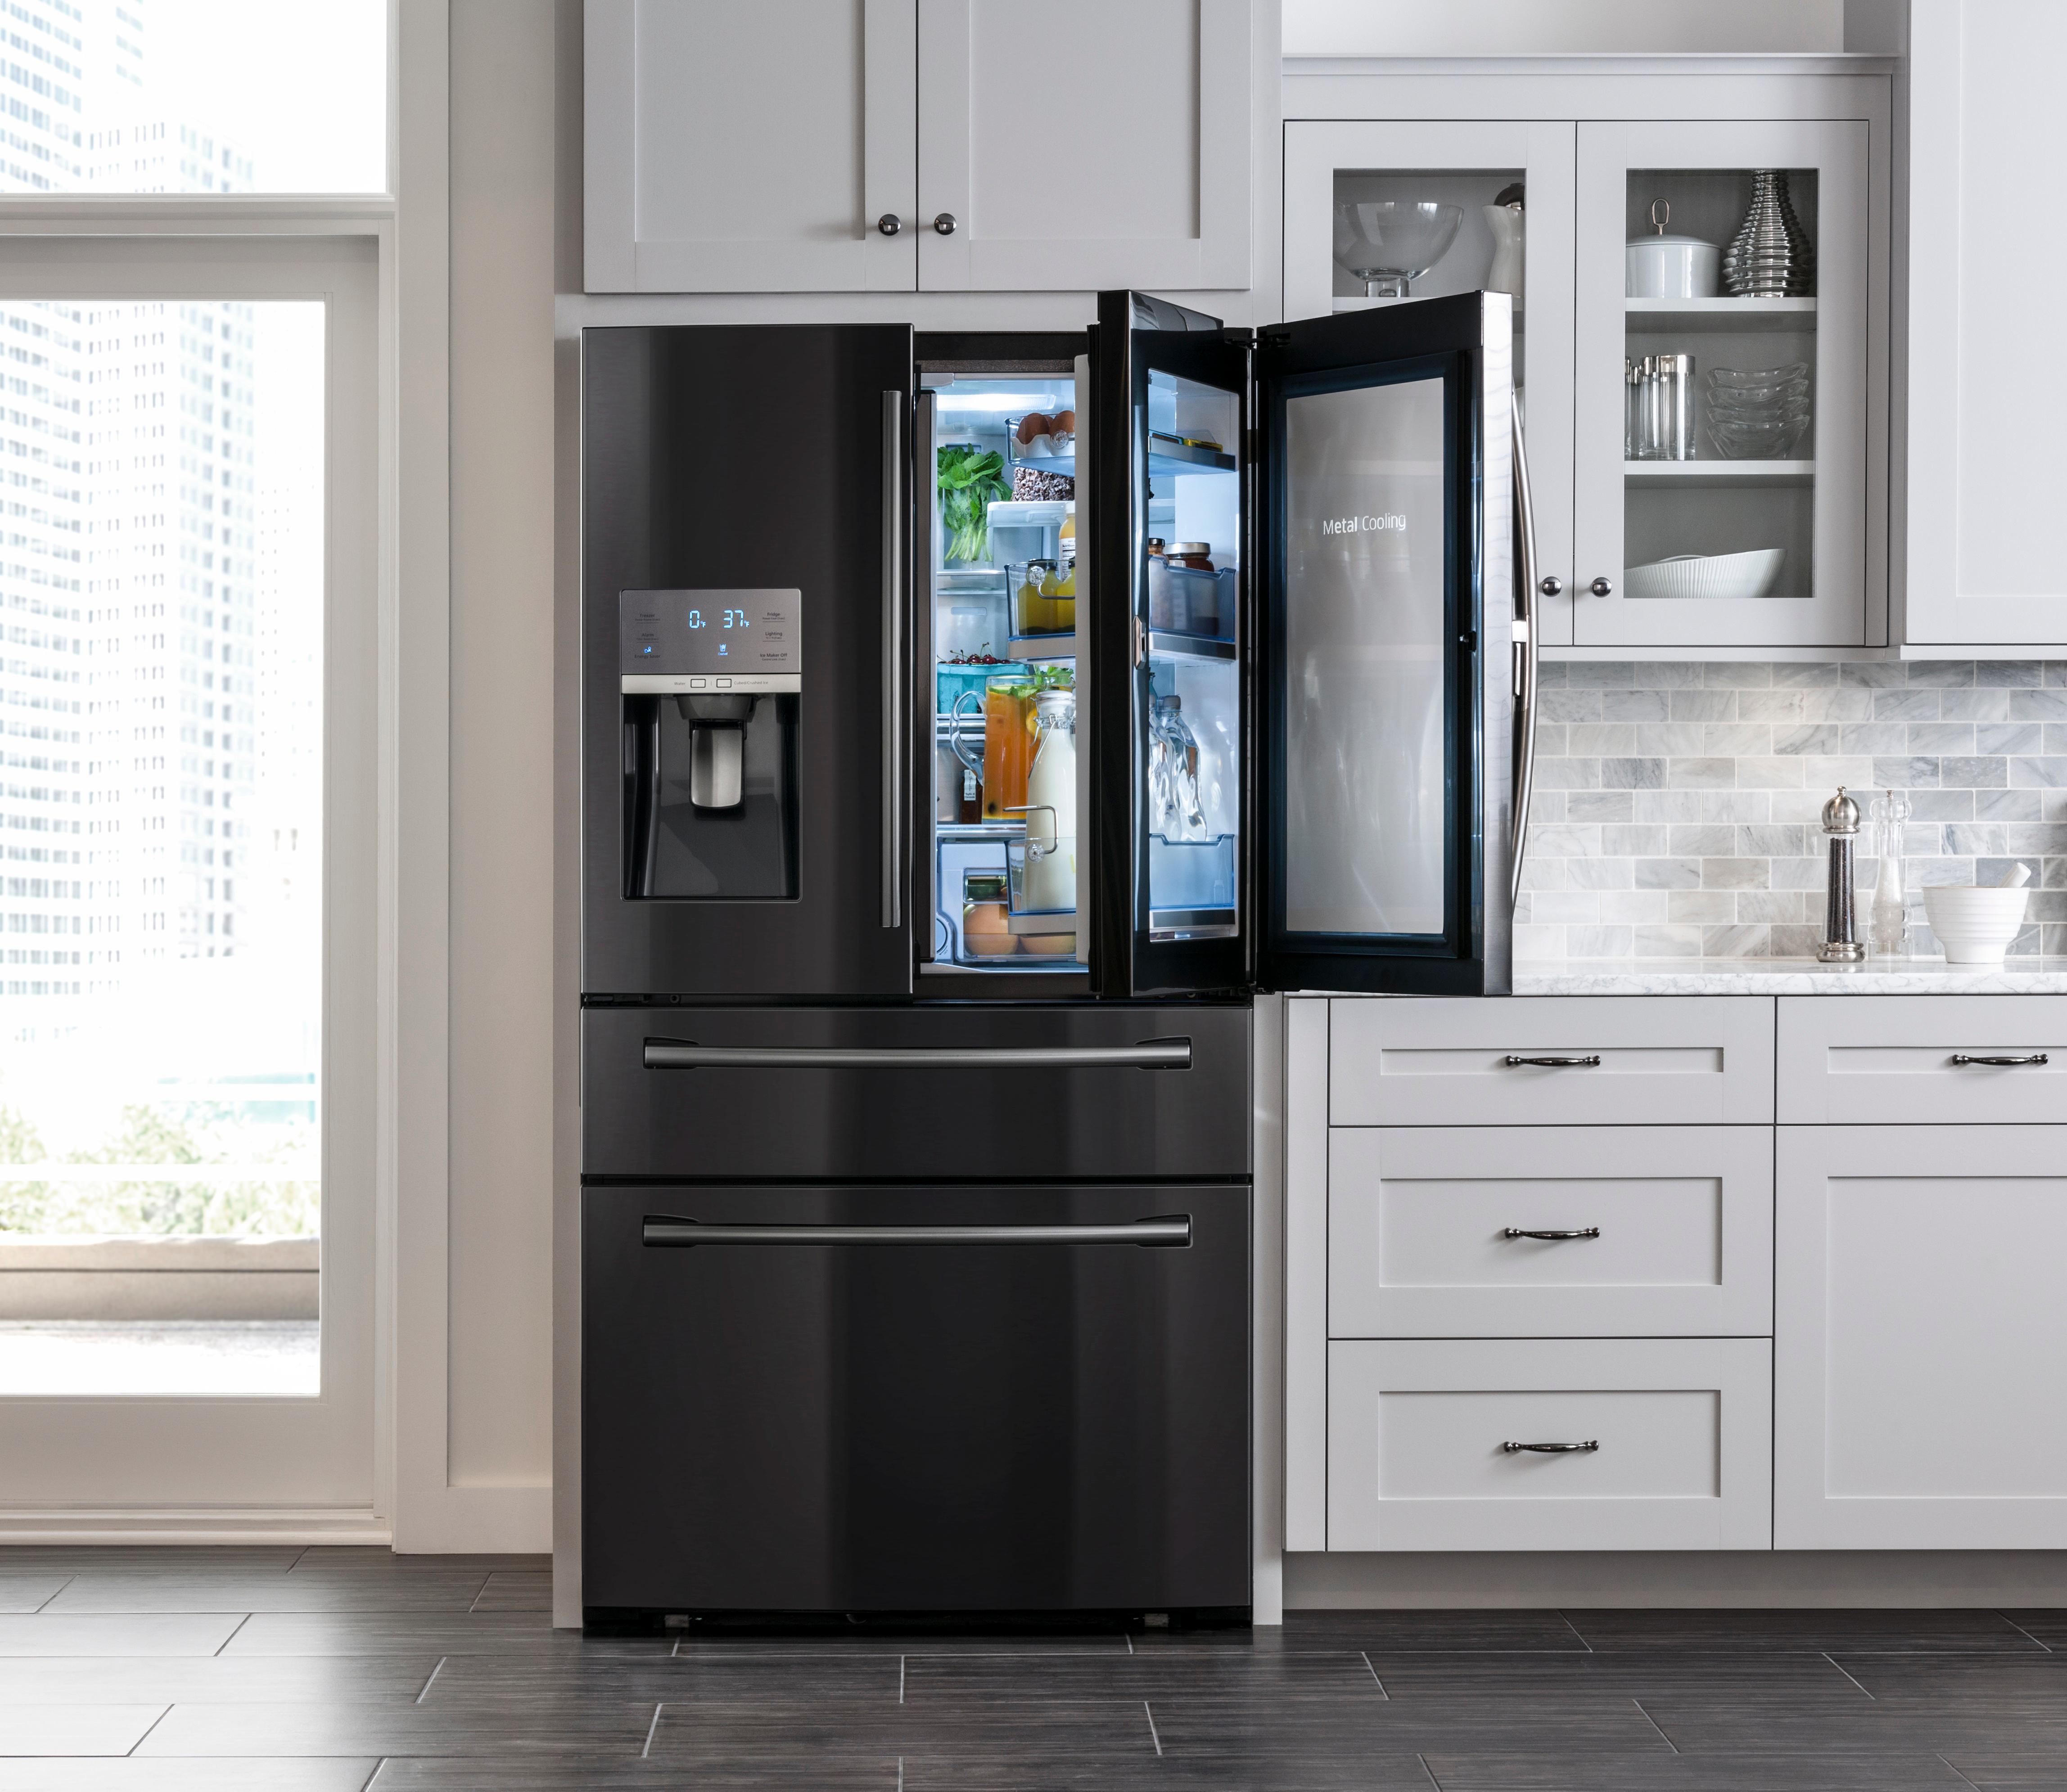 Kitchen Appliance Packages At Best Buy